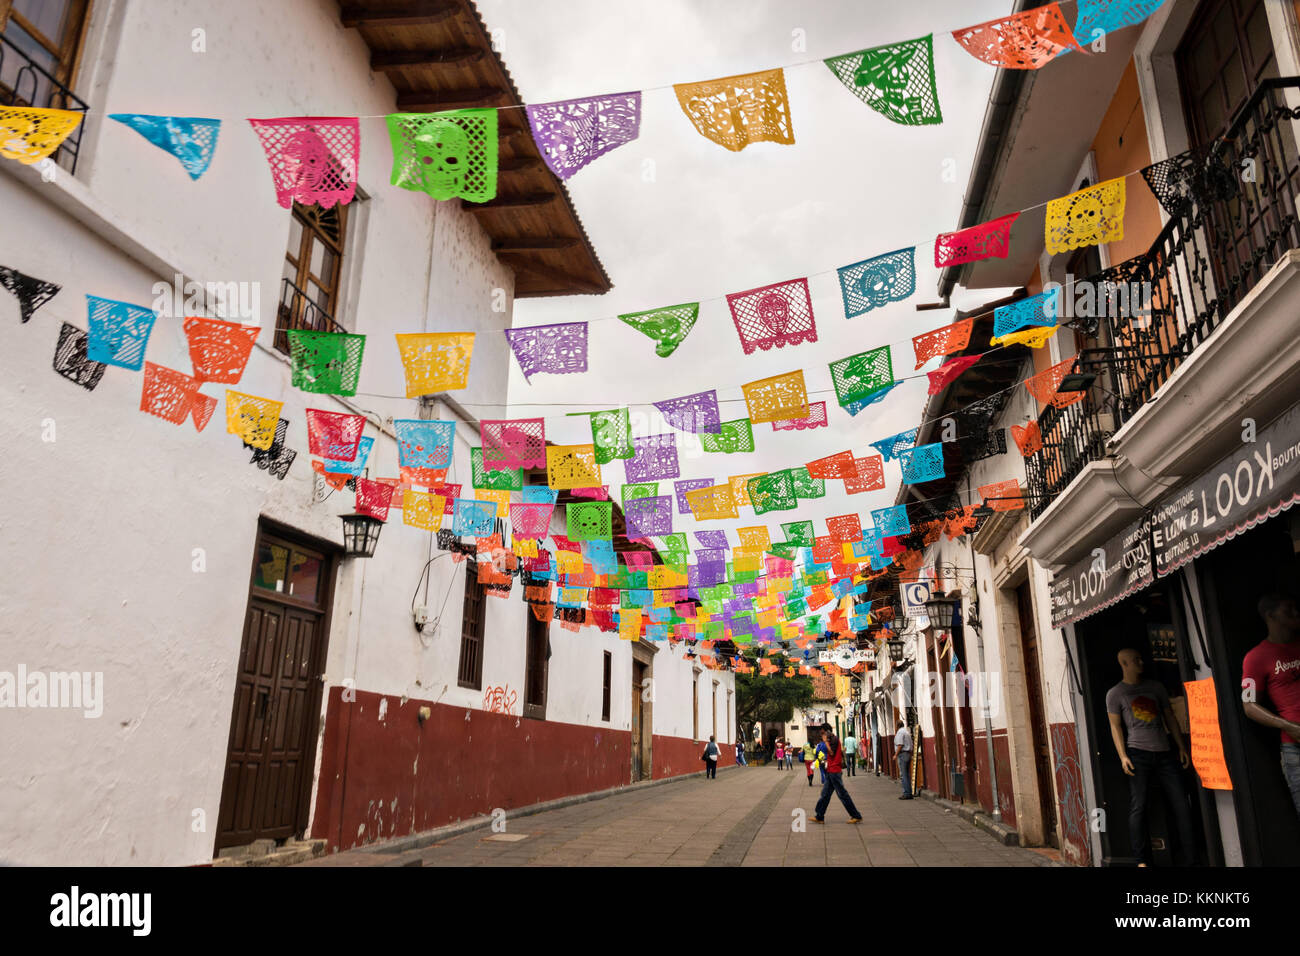 A pedestrian walkway decorated with colorful papel picado banners in Uruapan, Michoacan, Mexico. Stock Photo